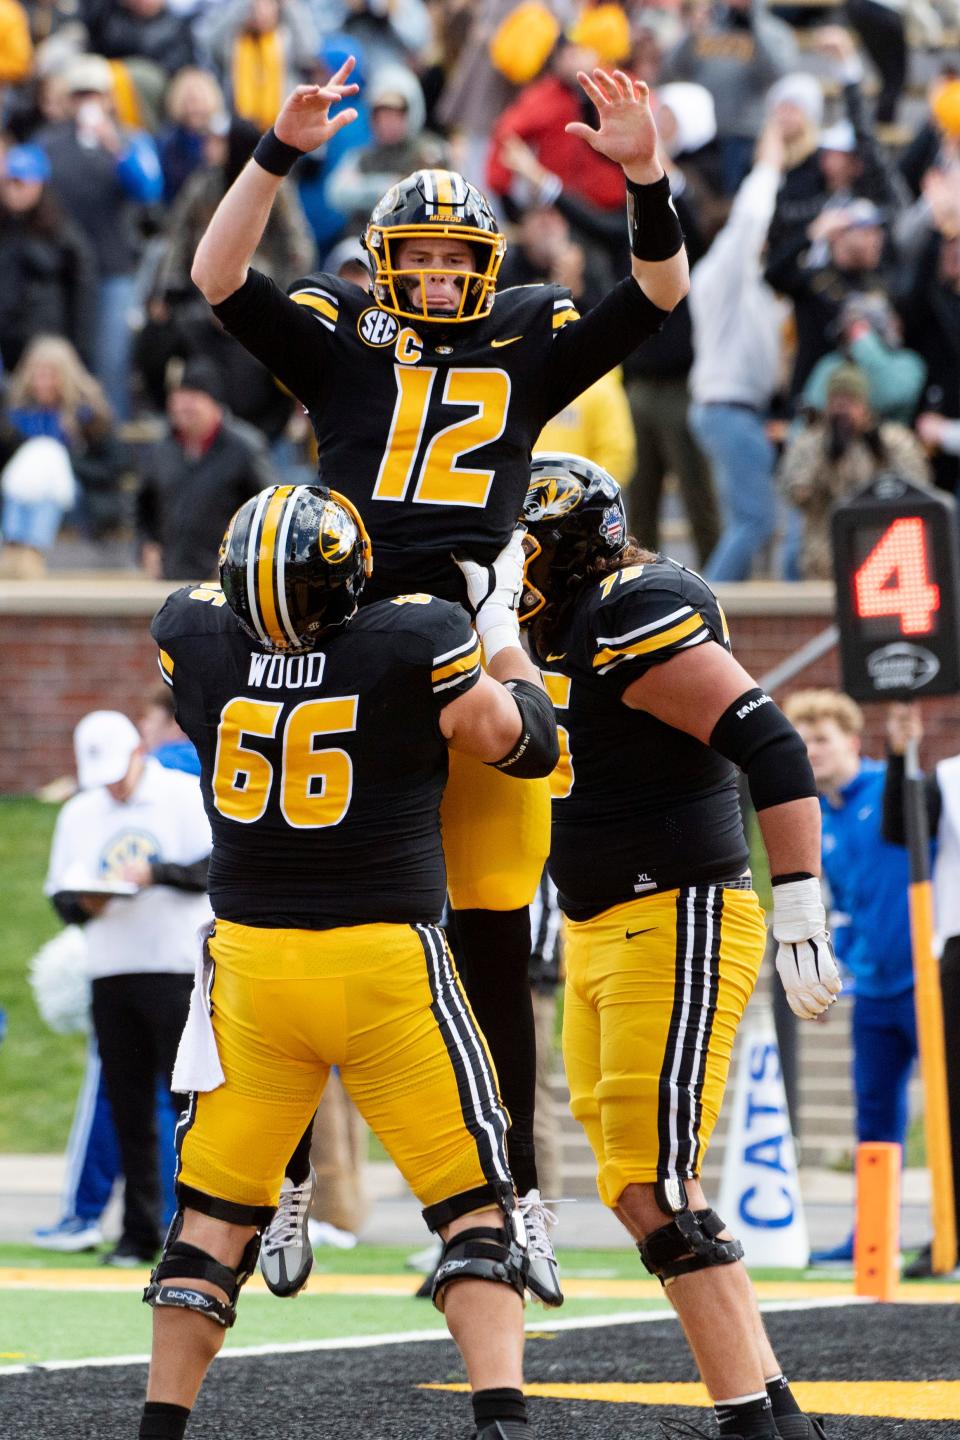 Missouri quarterback Brady Cook, top, is lifted in the air by offensive lineman Connor Wood after scoring a touchdown during the fourth quarter of an NCAA college football game against Kentucky, Saturday, Nov. 5, 2022, in Columbia, Mo. (AP Photo/L.G. Patterson)